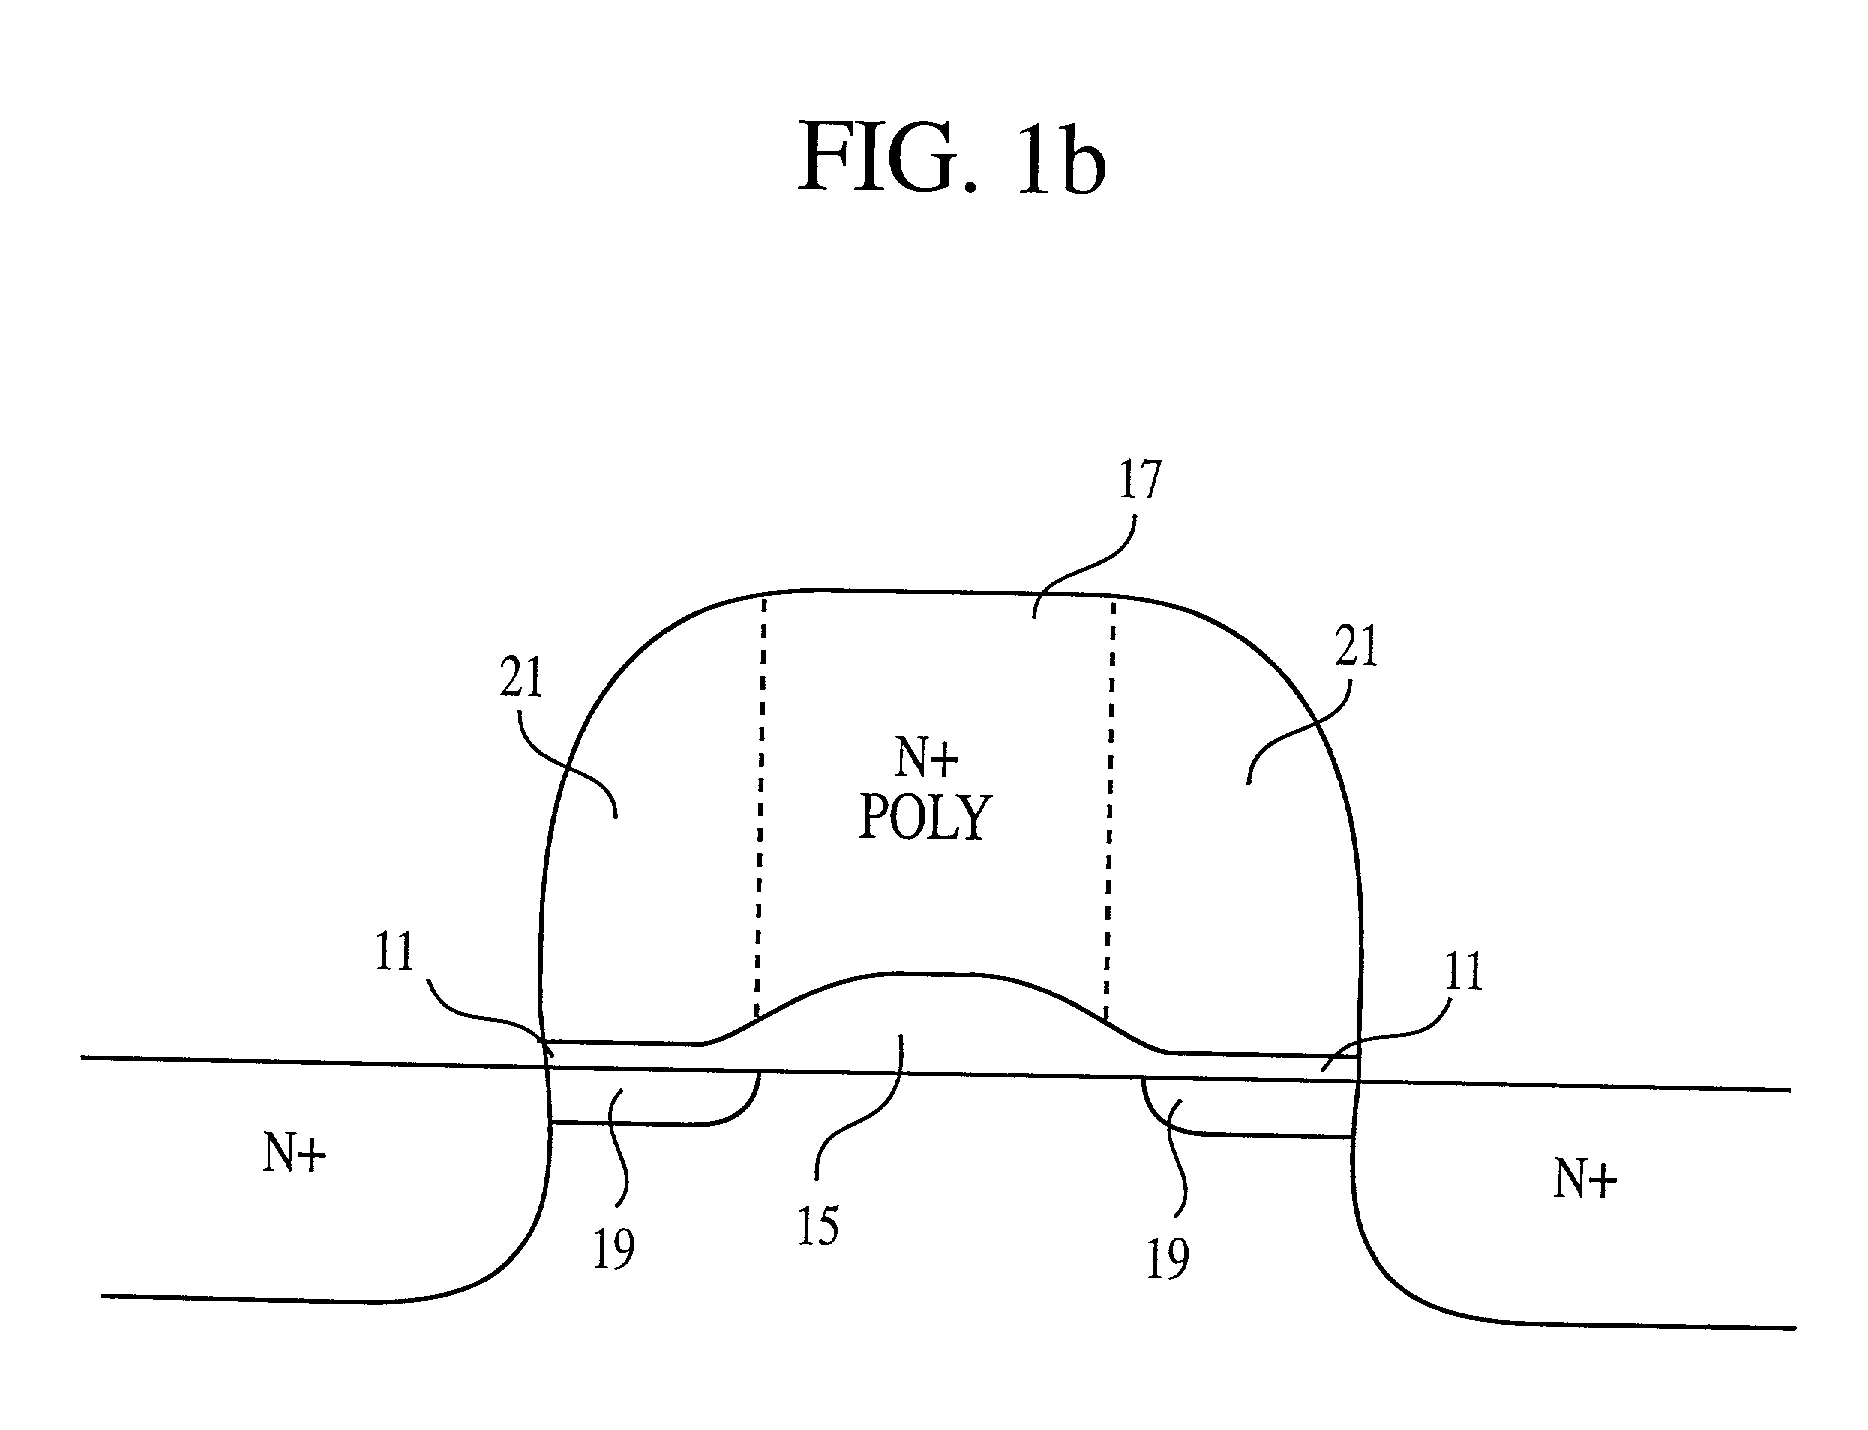 Technique to mitigate short channel effects with vertical gate transistor with different gate materials